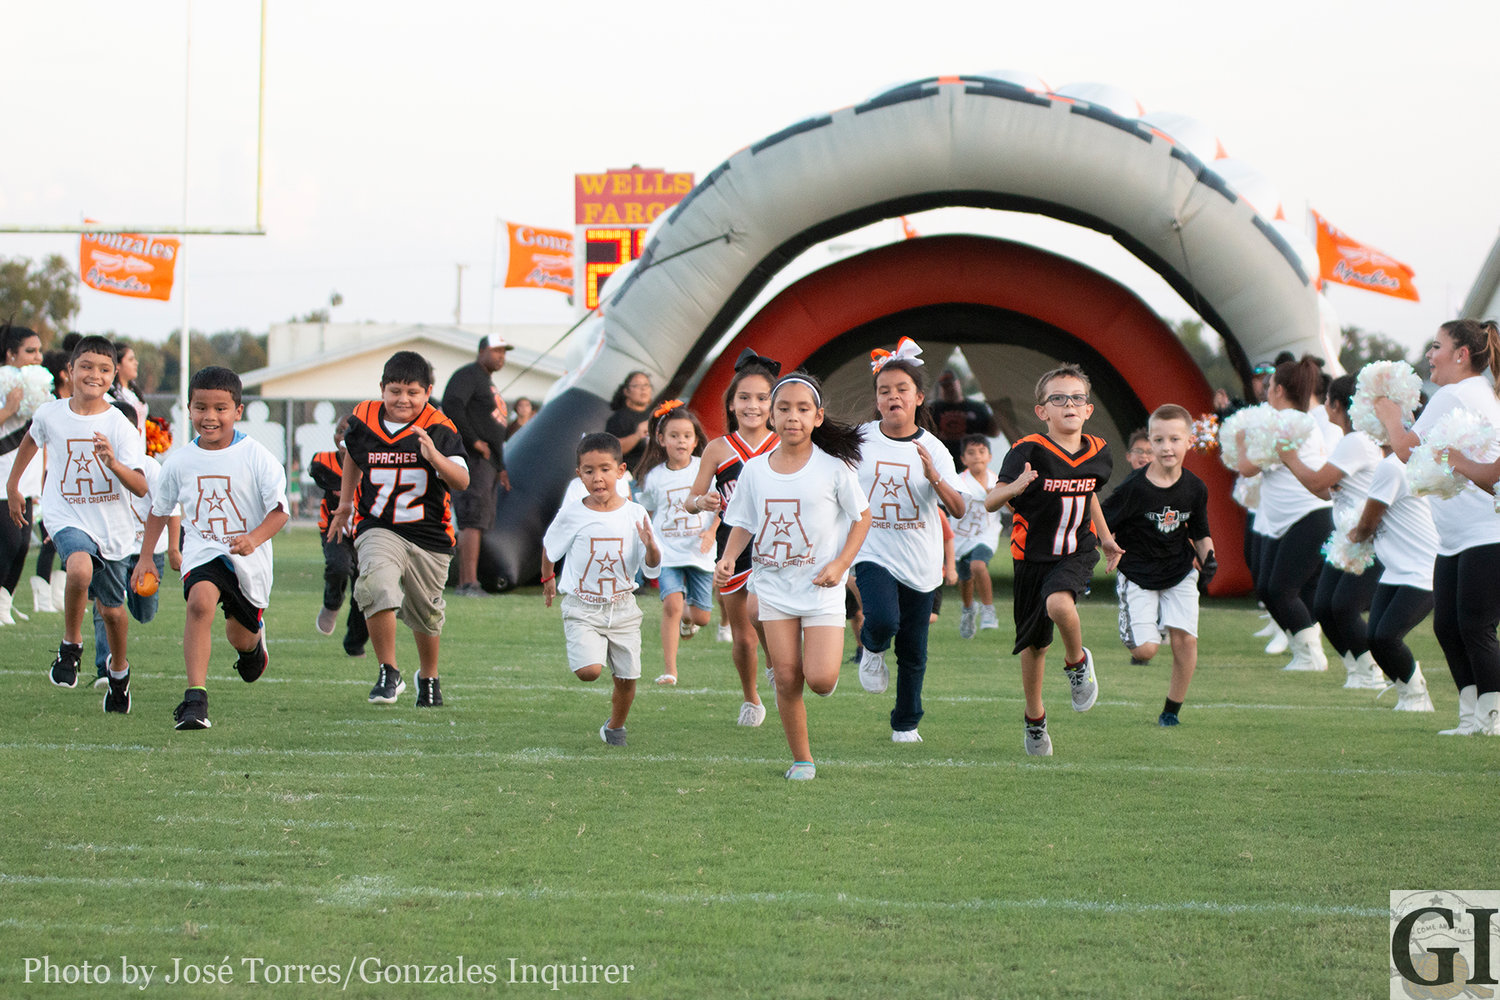 The Gonzales "Bleacher Creatures" run through the tunnel before kickoff at Apache Field.